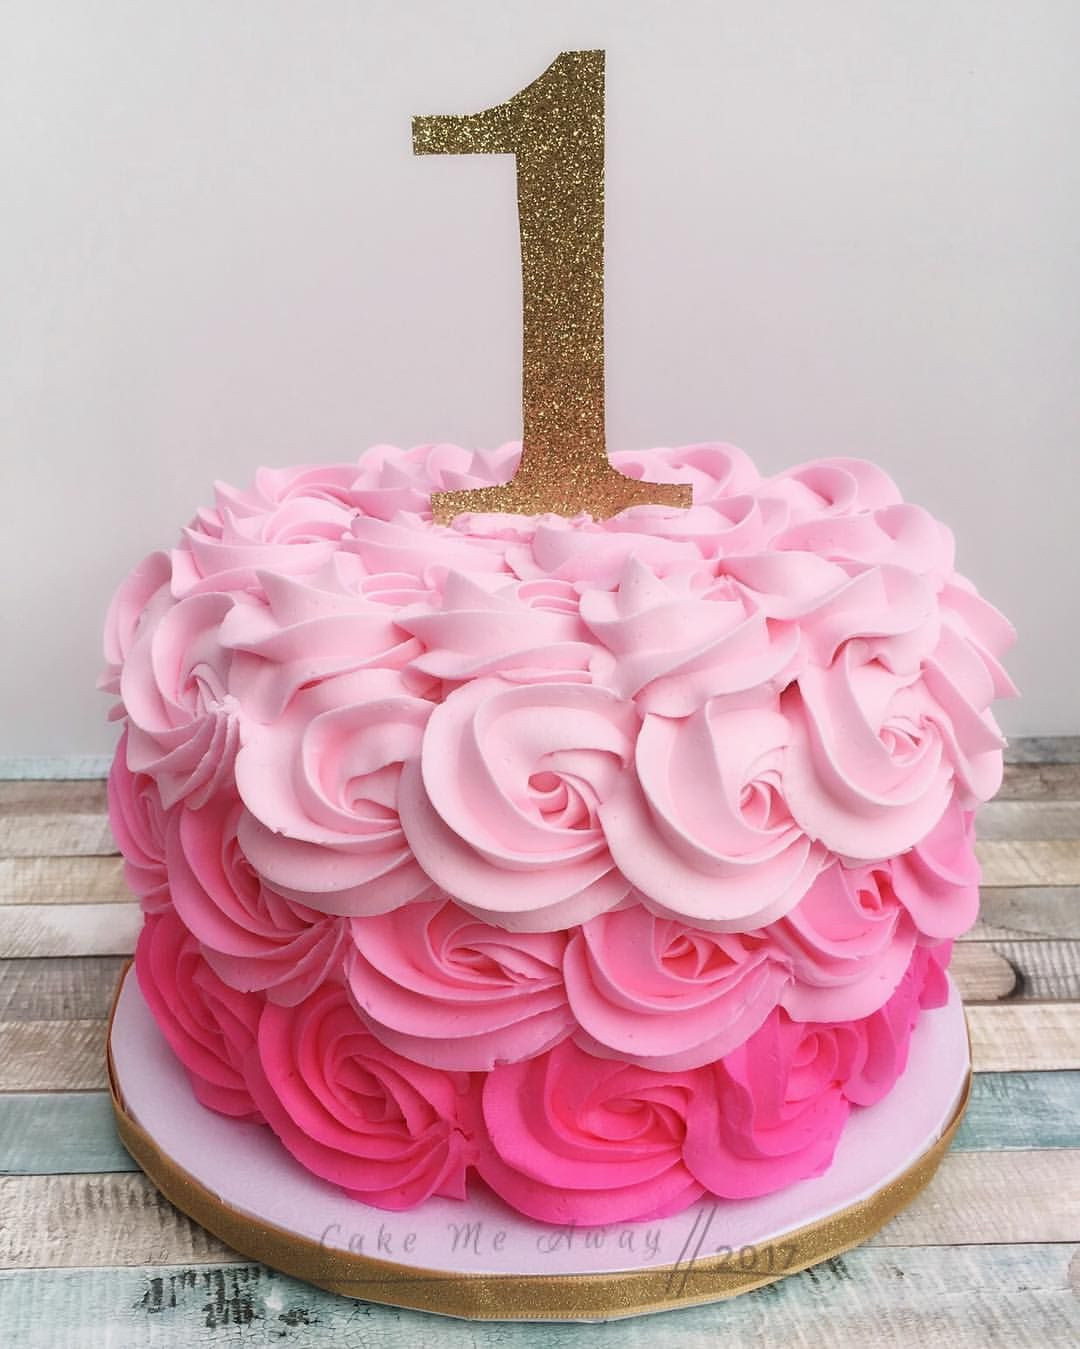 One Year Old Birthday Cake
 Pin by Ronda Sanborn on Cake ideas in 2019